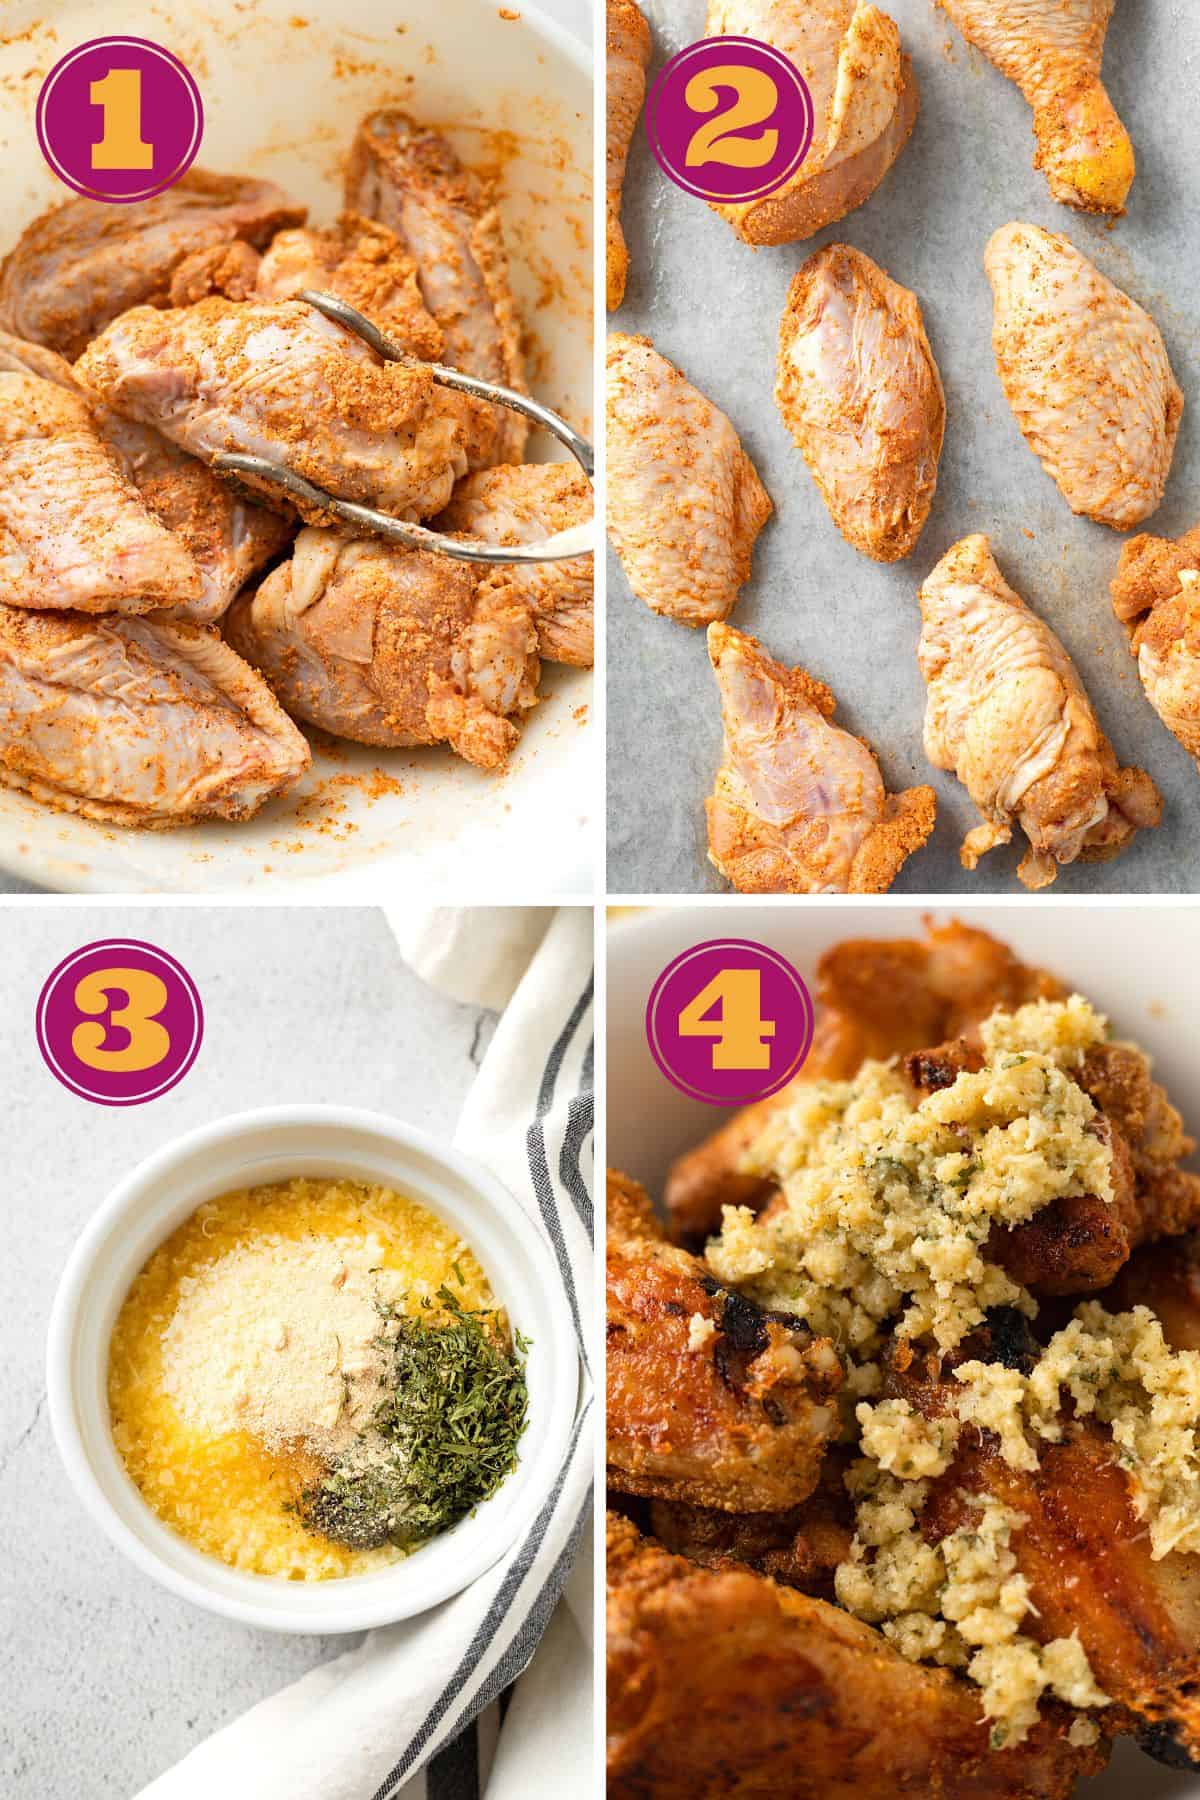 step-by-step instructions for how to make Garlic Parmesan chicken wings in the oven